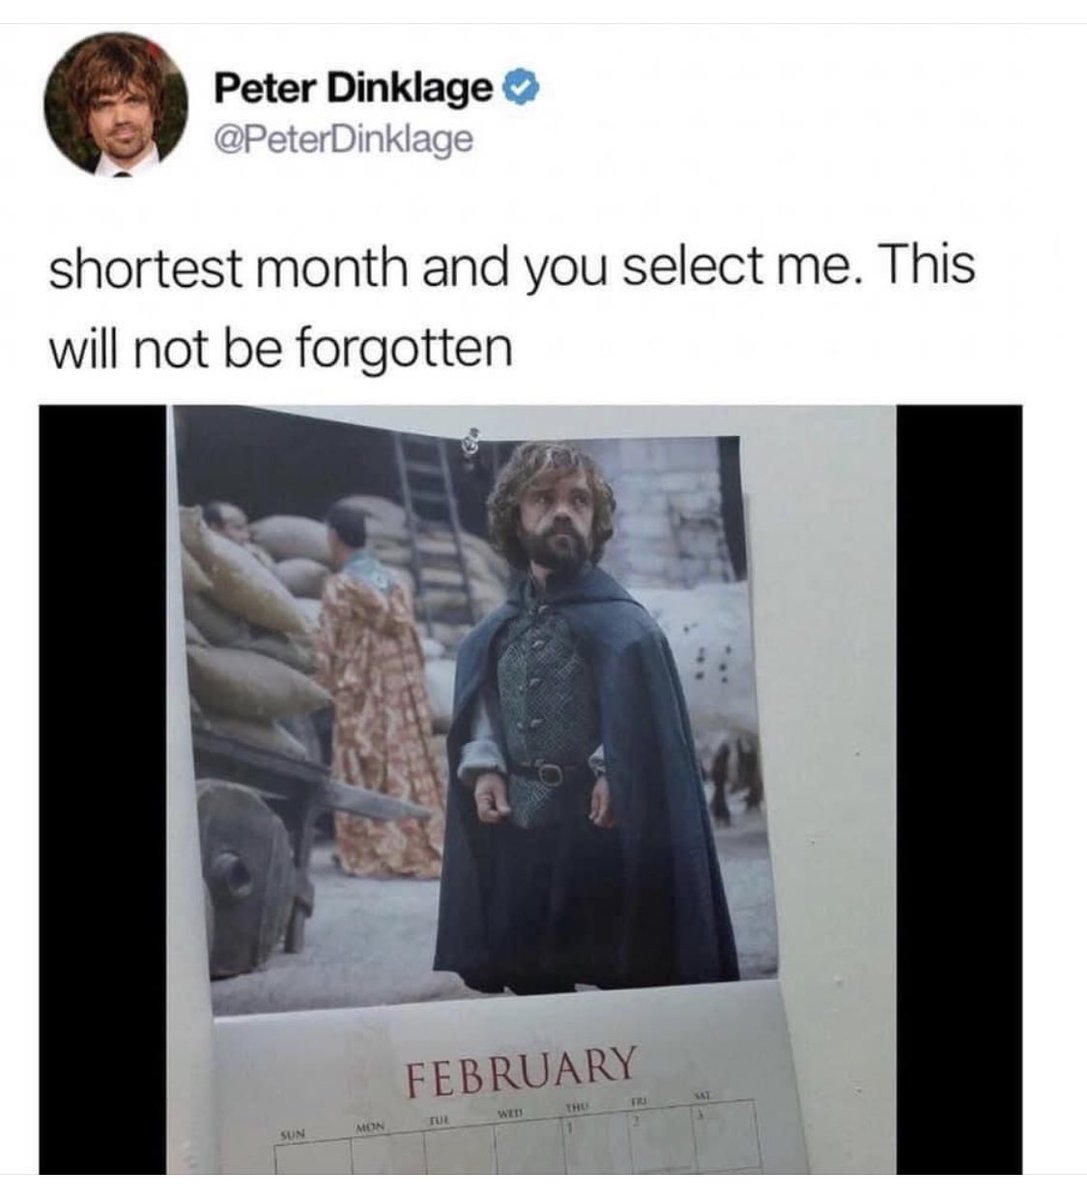 shortest month and you select me - Peter Dinklage shortest month and you select me. This will not be forgotten Sun Mon February Tul Wed Thu Fri